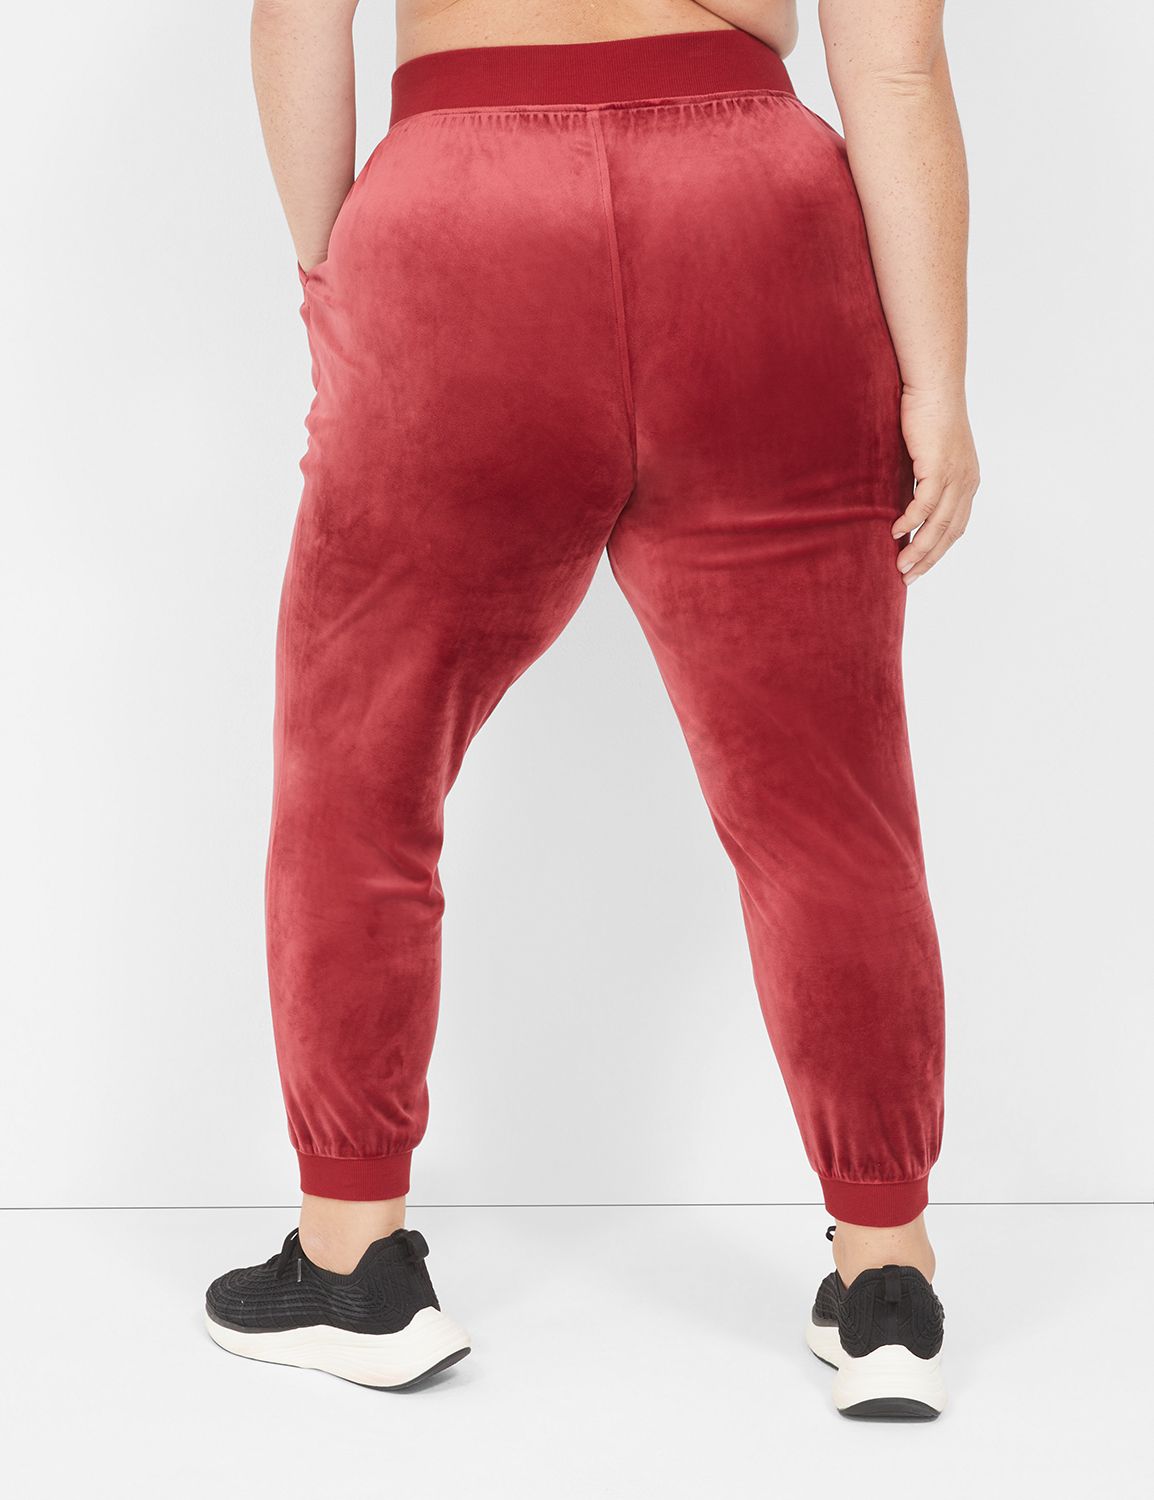 Athletic Works Women's Plus Size Joggers with Pockets 